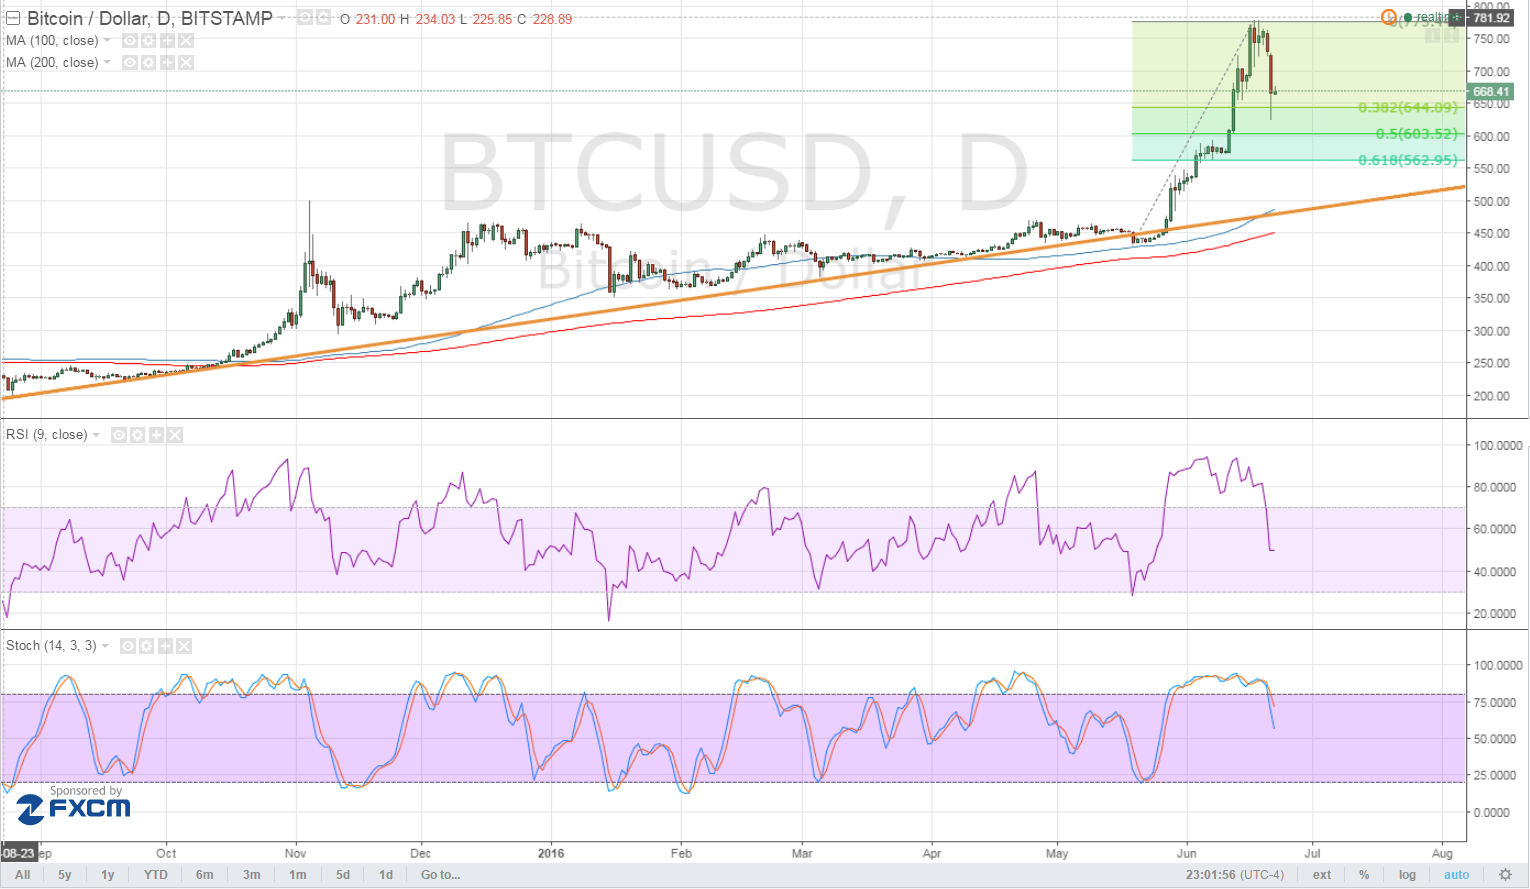 Bitcoin Price Technical Analysis for 06/22/2016 - Still in Correction Mode!